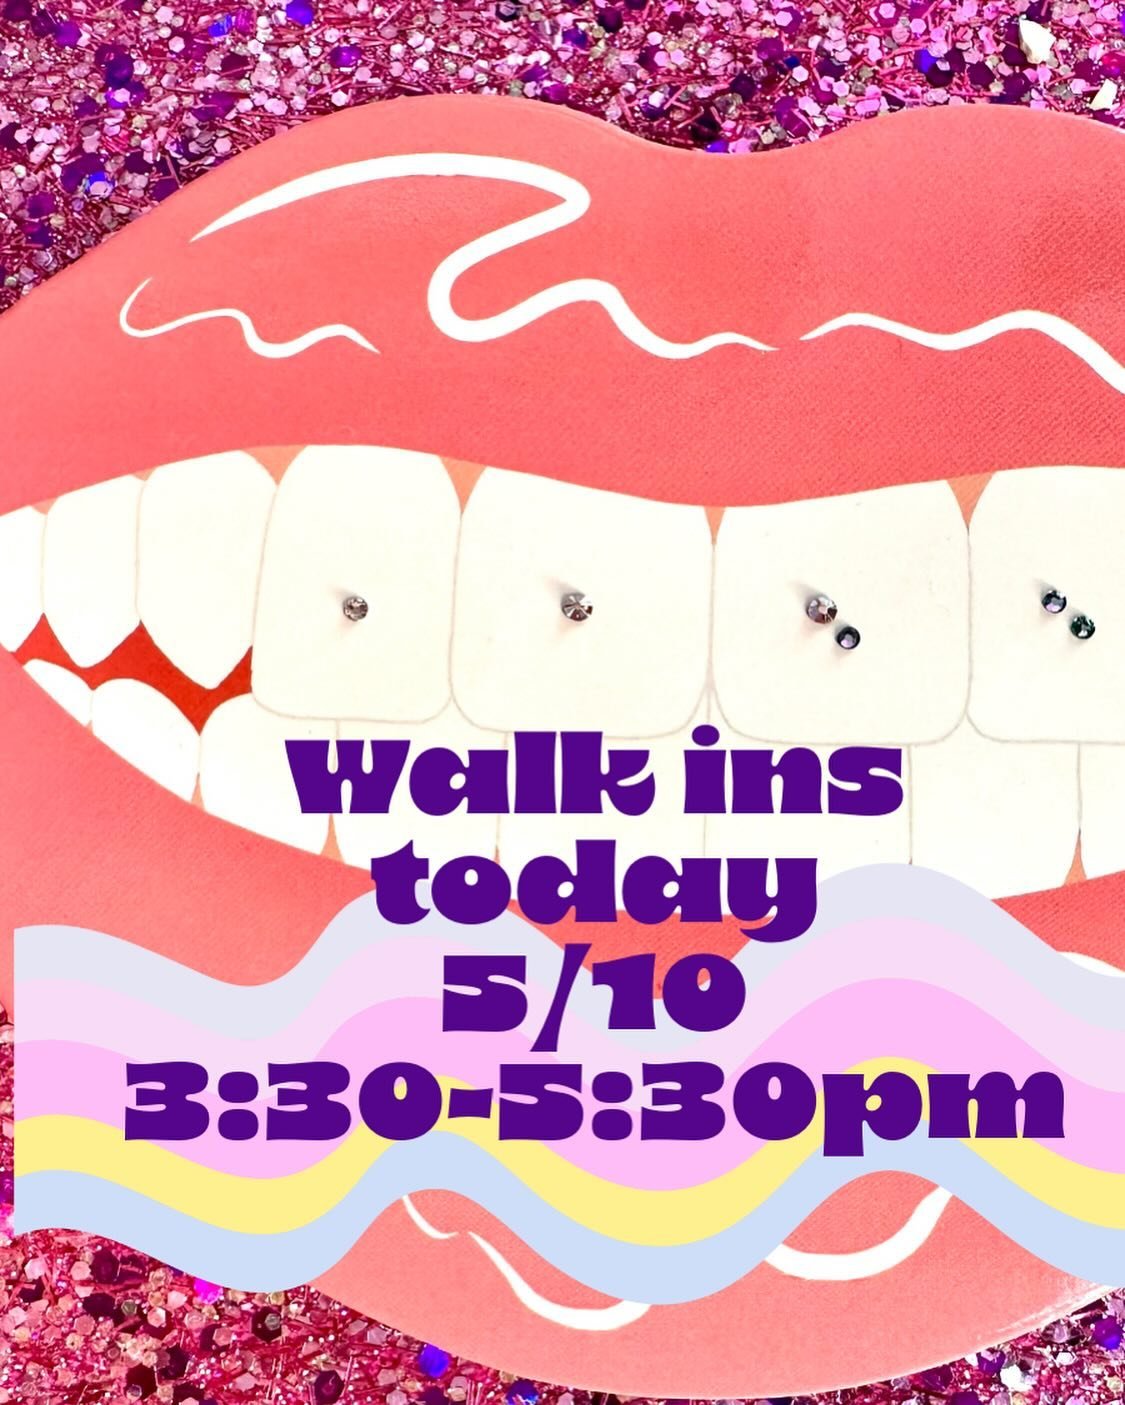 Poppin in today to take care of your last minute tooth gem needs 🦷 come through 💖💖💖 #toothgems #toothgmetechnicians #neworleans